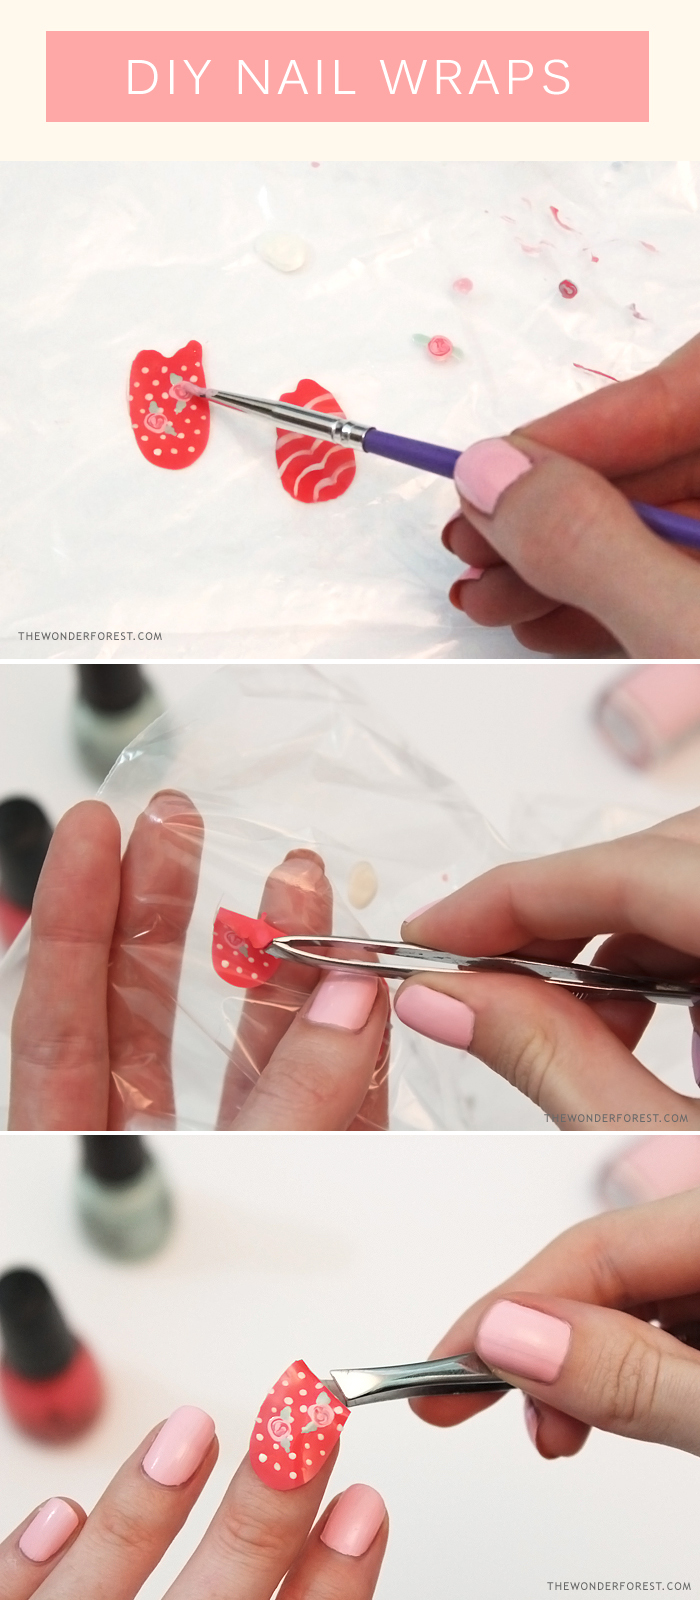 Make Your Own Nail Wraps! - Wonder Forest